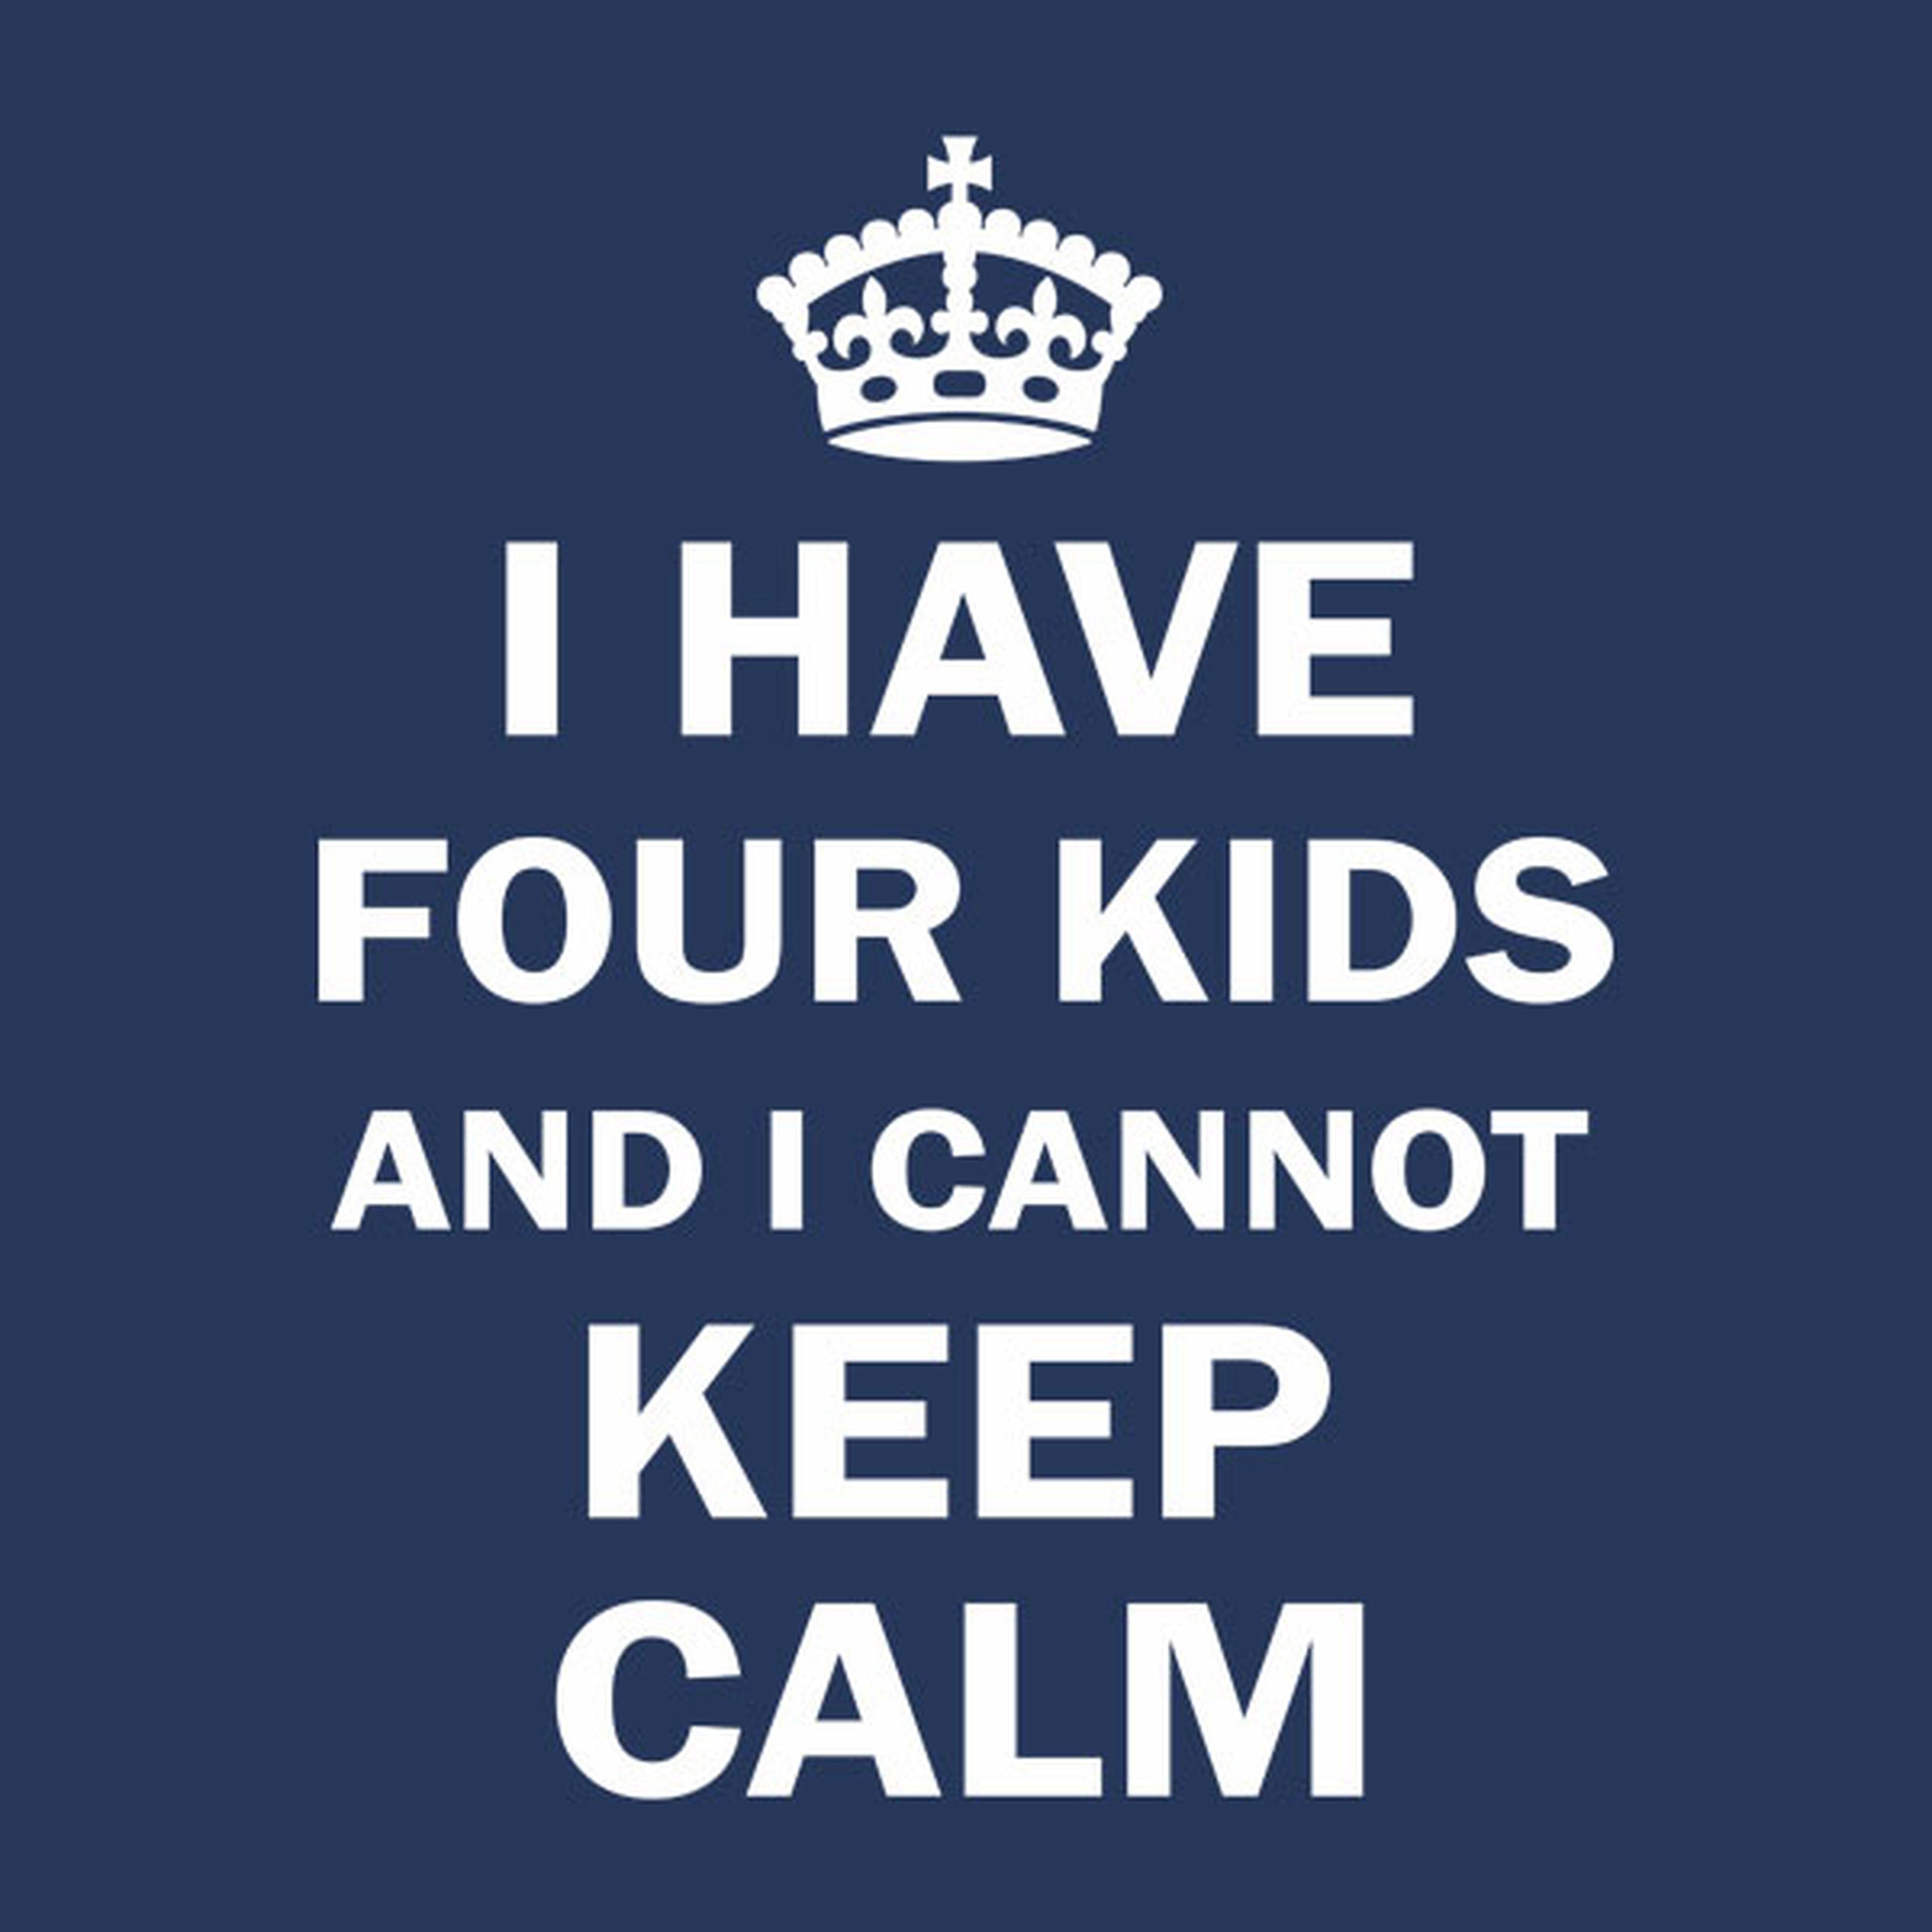 I have 4 kids and I cannot keep calm - T-shirt